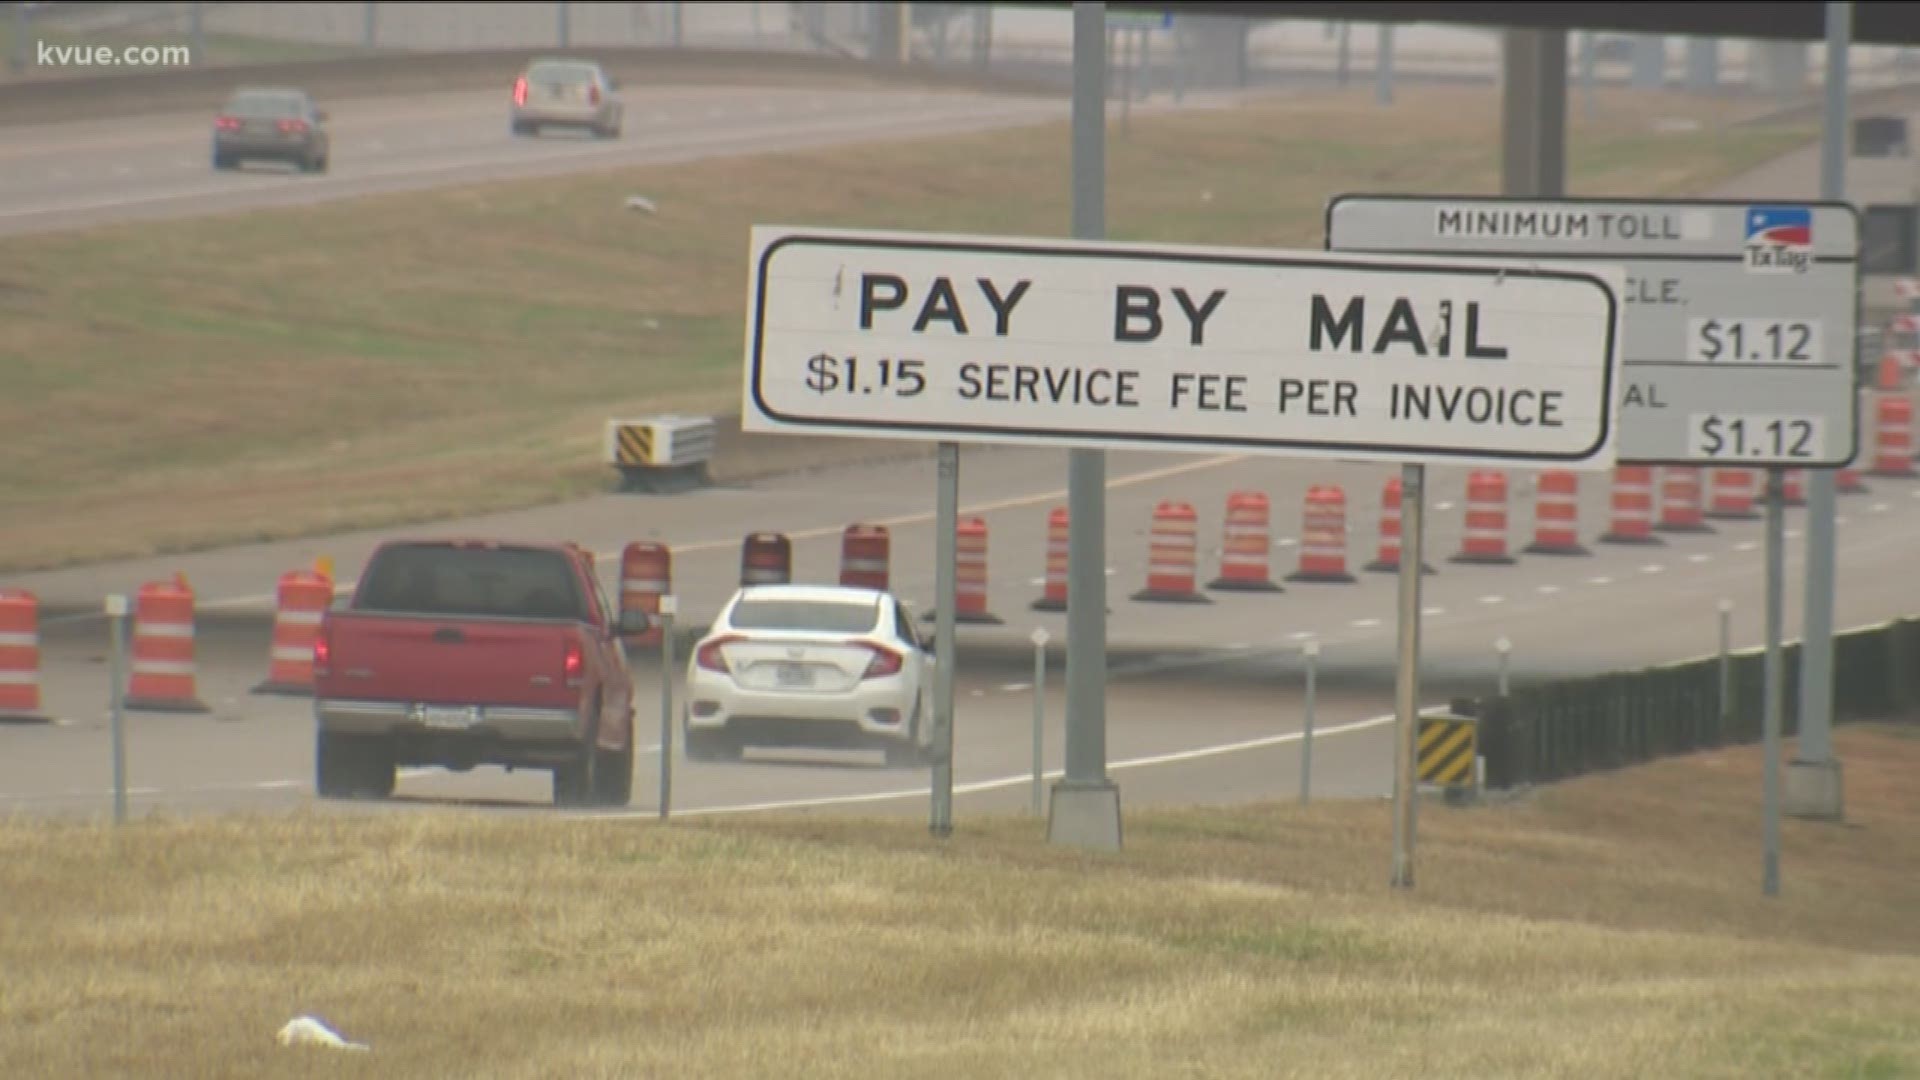 TxDOT said it's in the middle of deactivating thousands of accounts while it upgrades the tolling system.